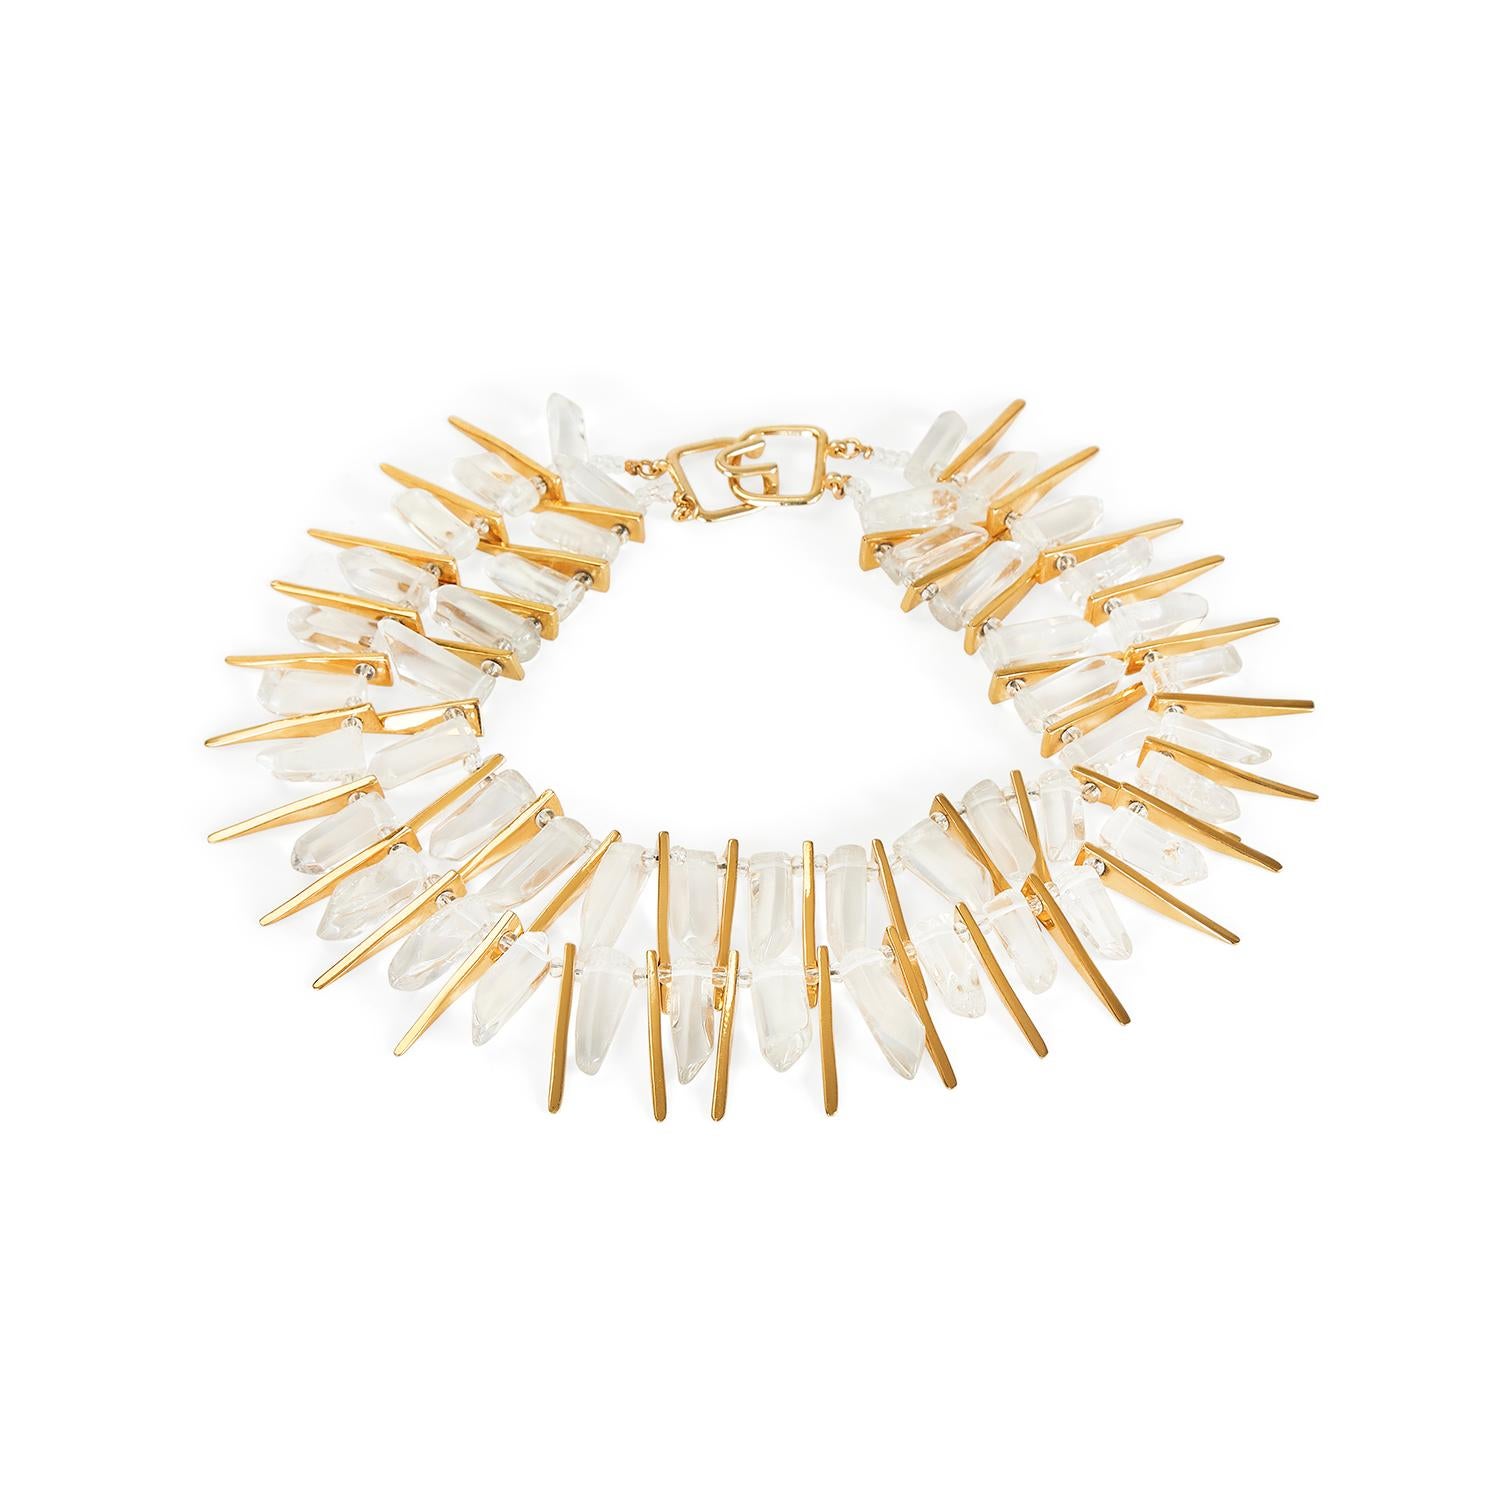 This incredible 1990s necklace by Kenneth Jay Lane makes a real statement and was designed to turn heads! It features a two strand chain comprised of elongated gold pieces, and clear glass beads which very realistically emulate rock crystal. The